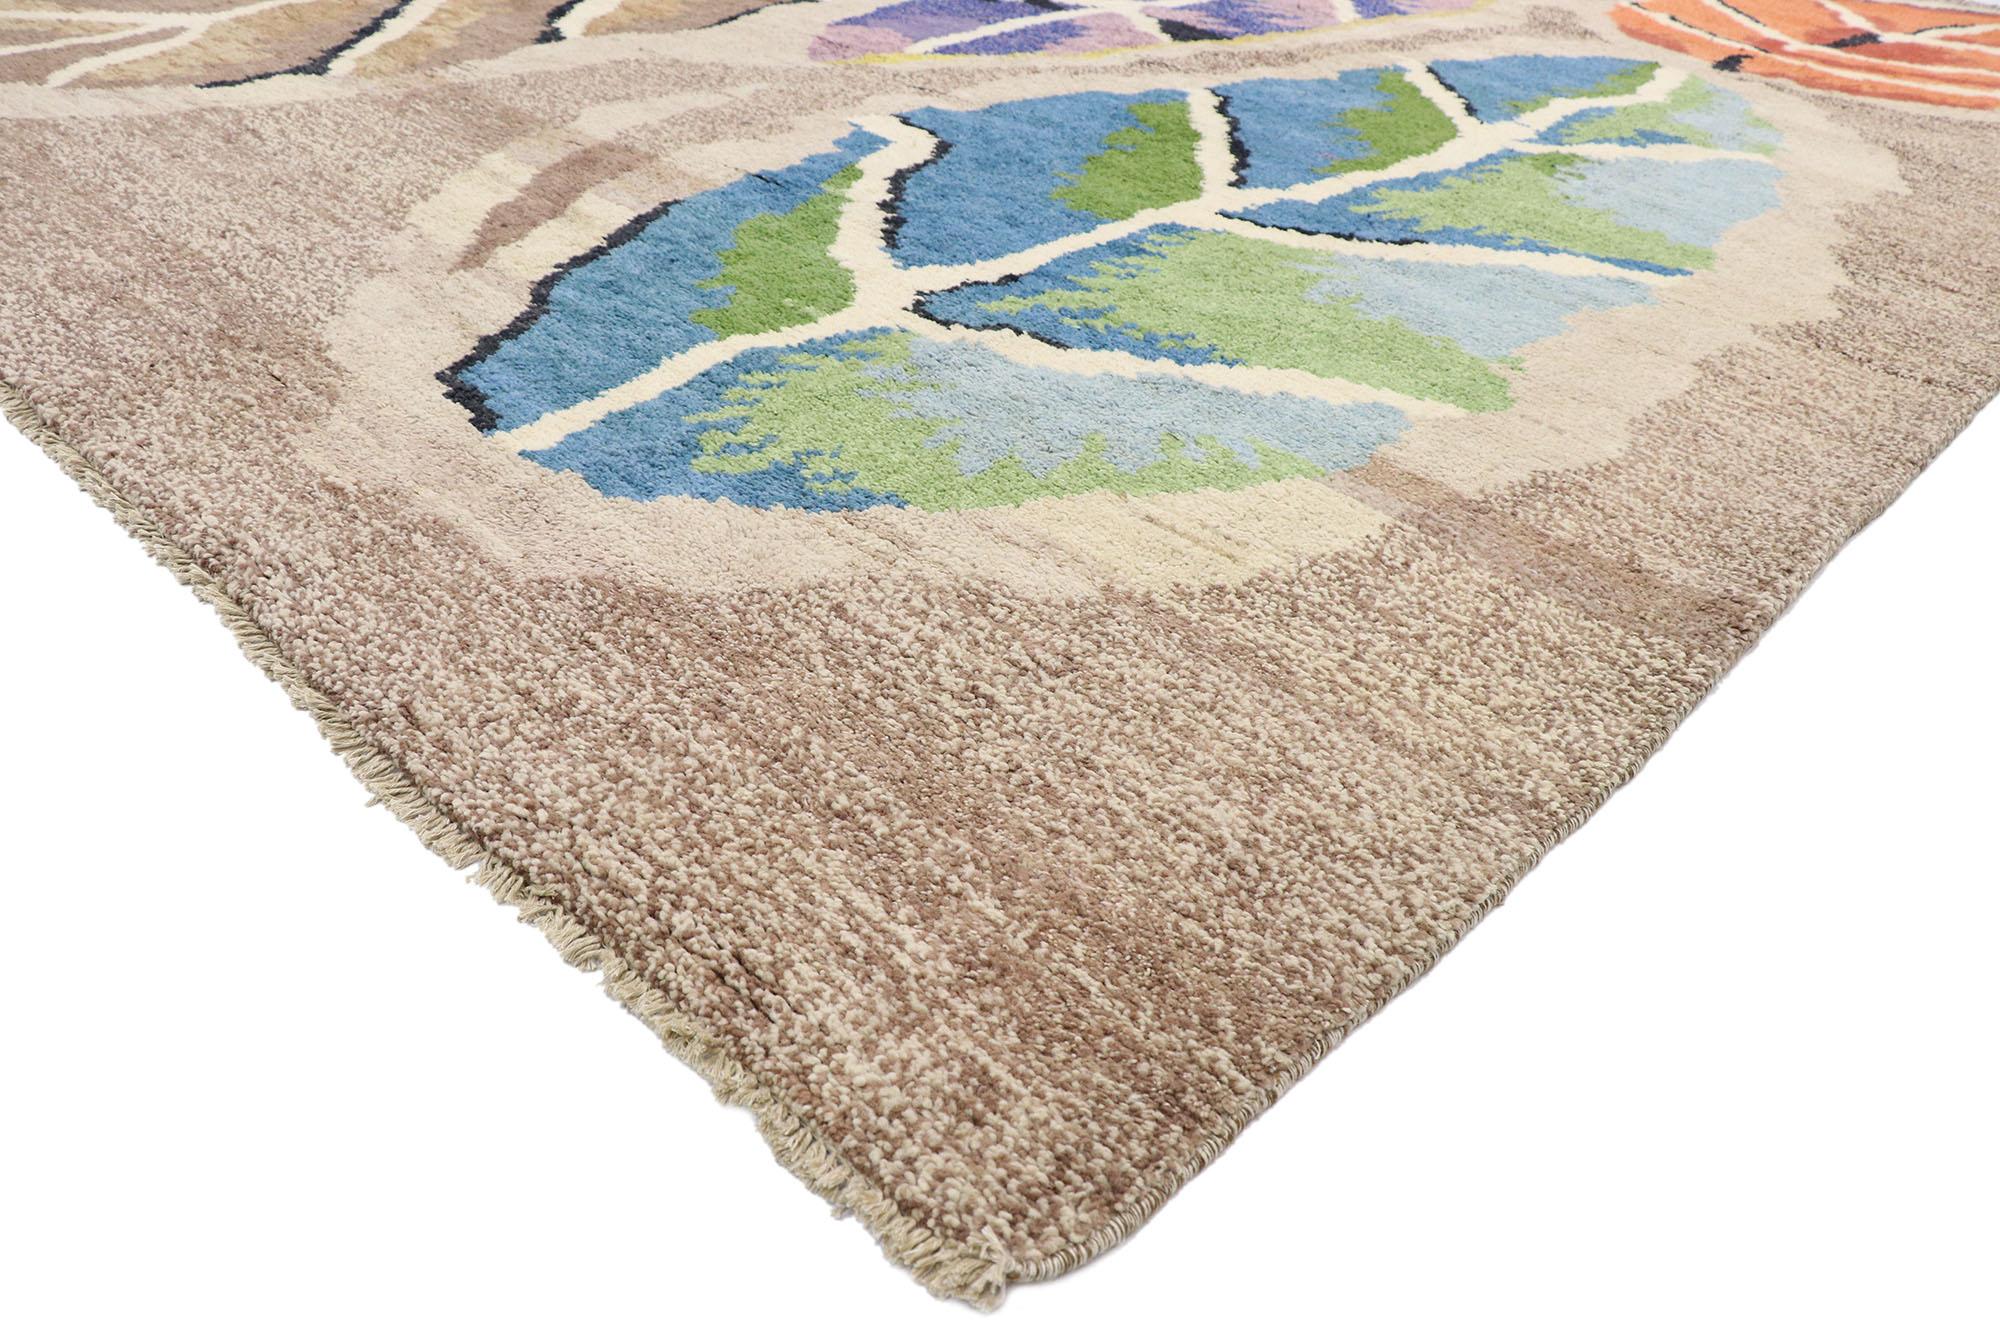 80661, new contemporary Moroccan style rug with biophilic Scandinavian modern design 10'04 x 14'04. Reflecting elements of nature, this hand-knotted wool contemporary Moroccan style rug awakens the soul with elevated Biophilic Design. The